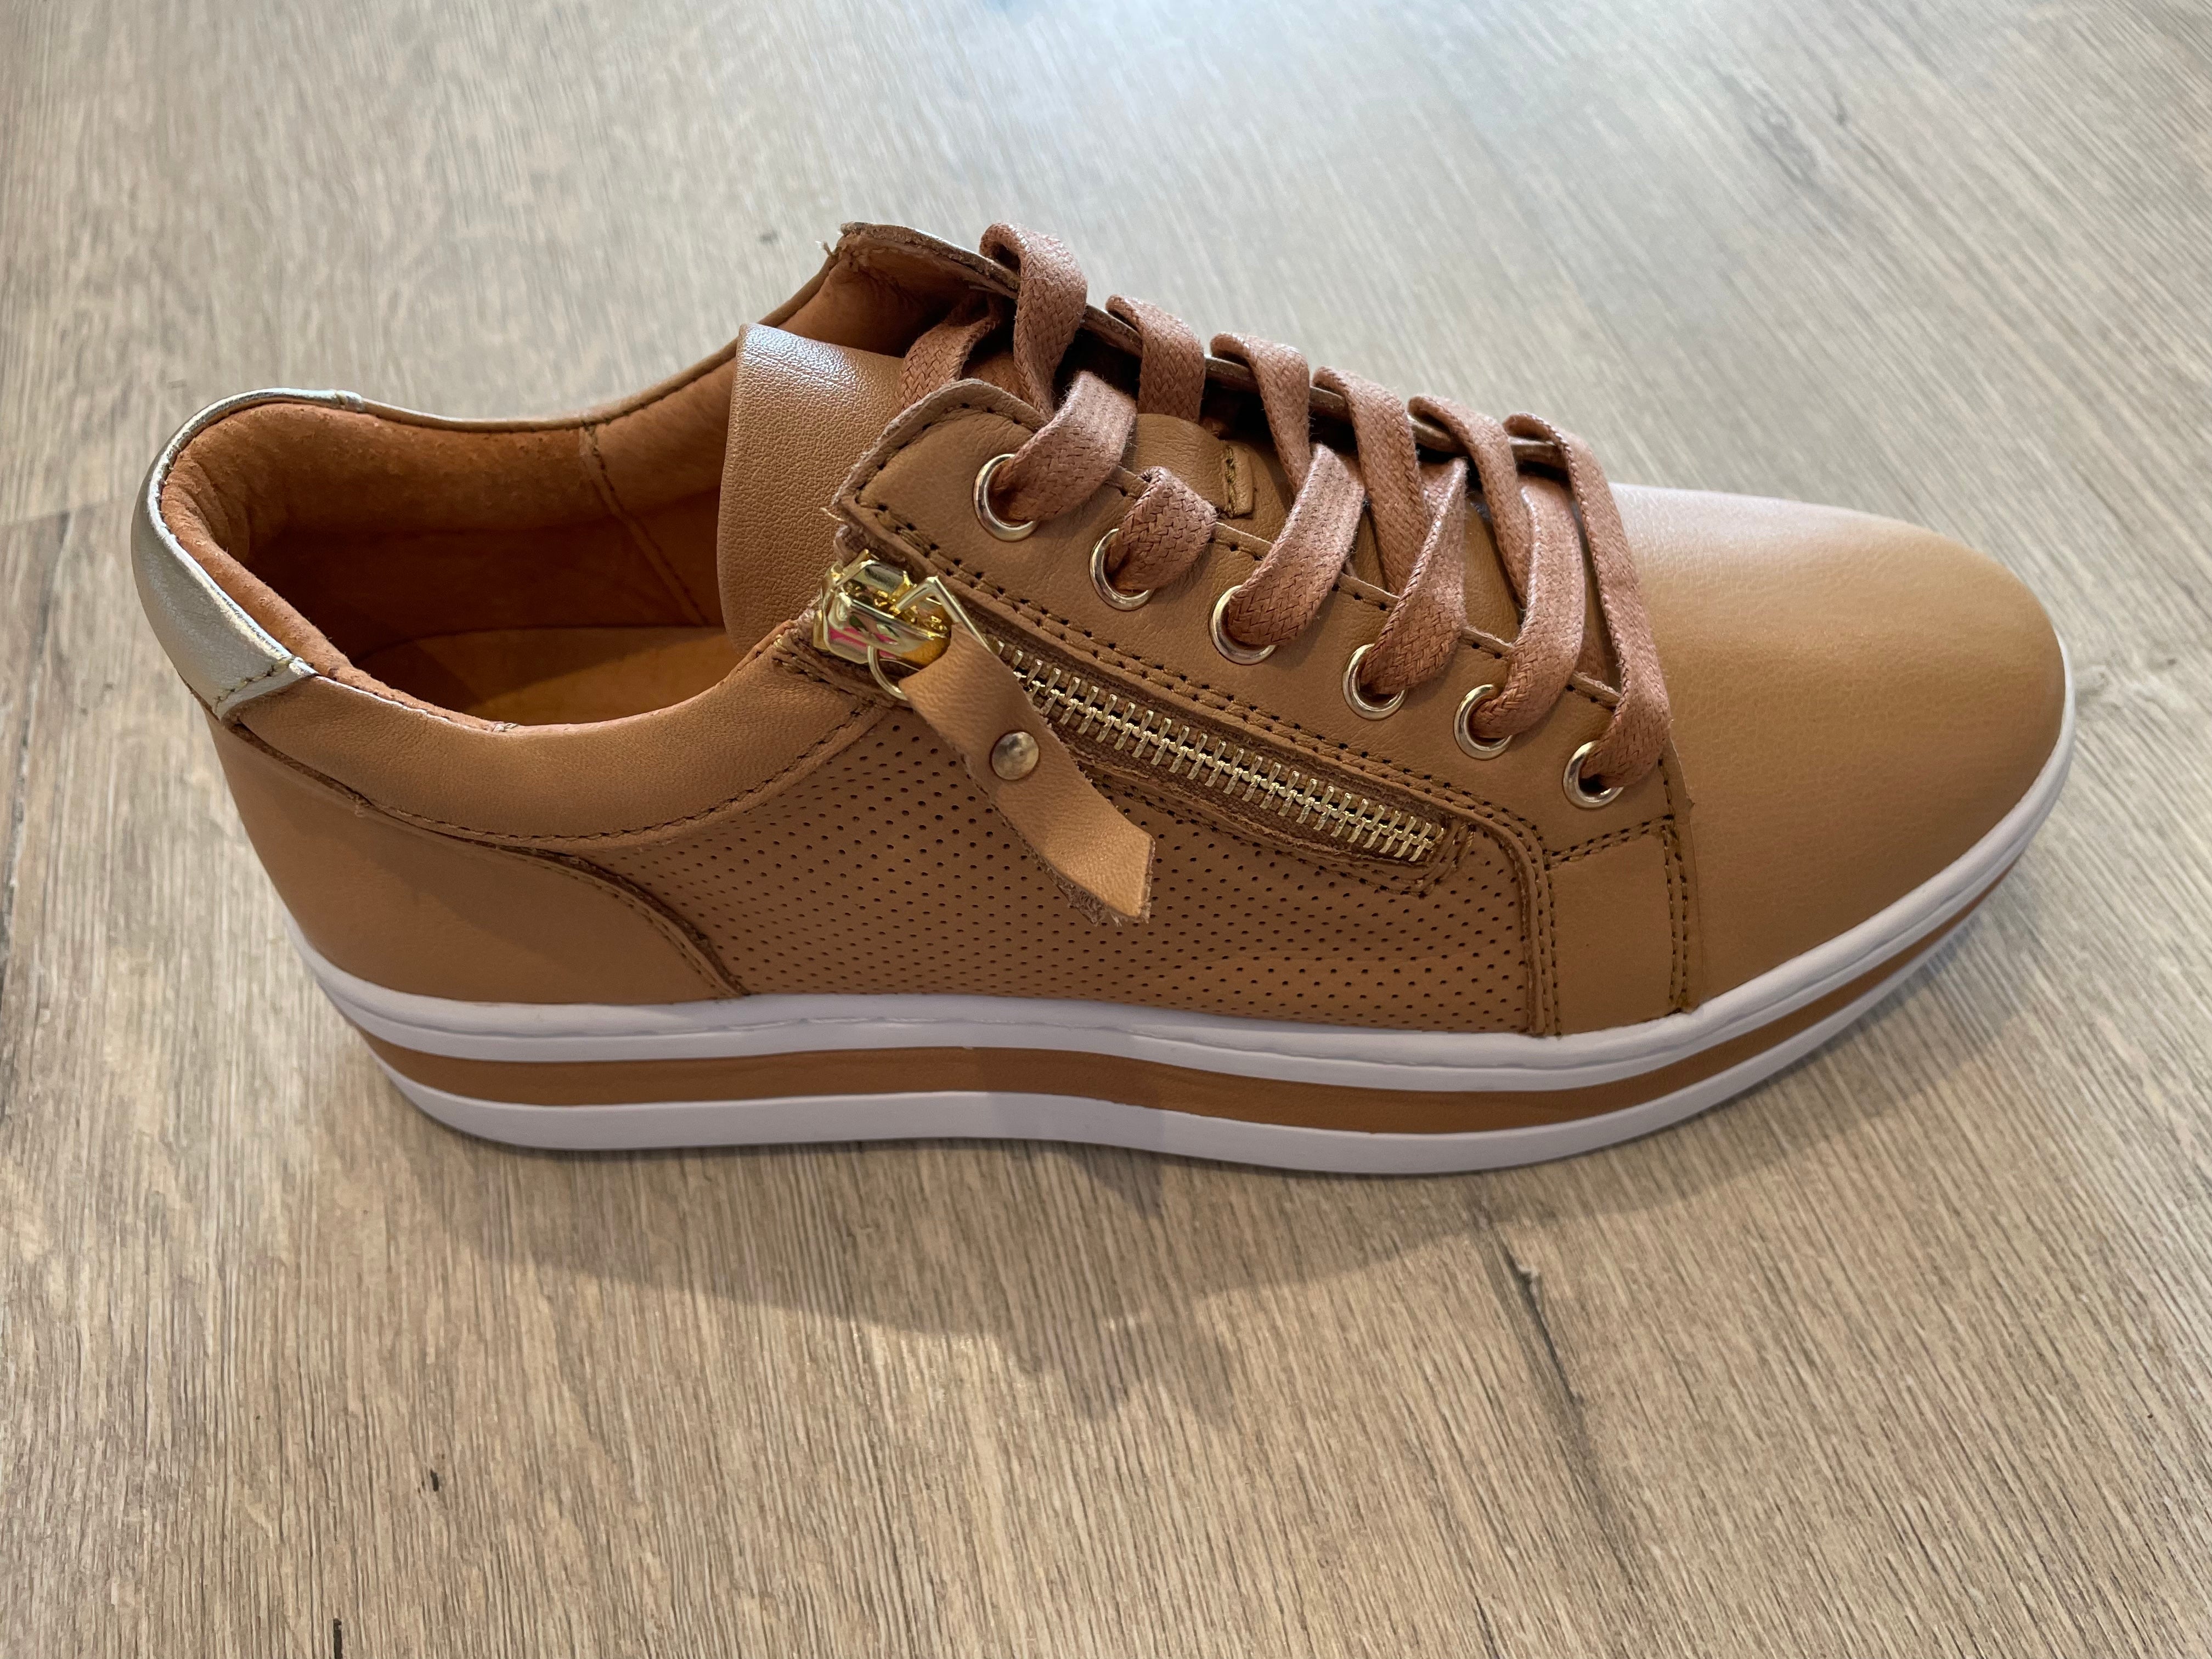 Alfie & Evie - Pinny - Camel/Gold Leather Sneaker